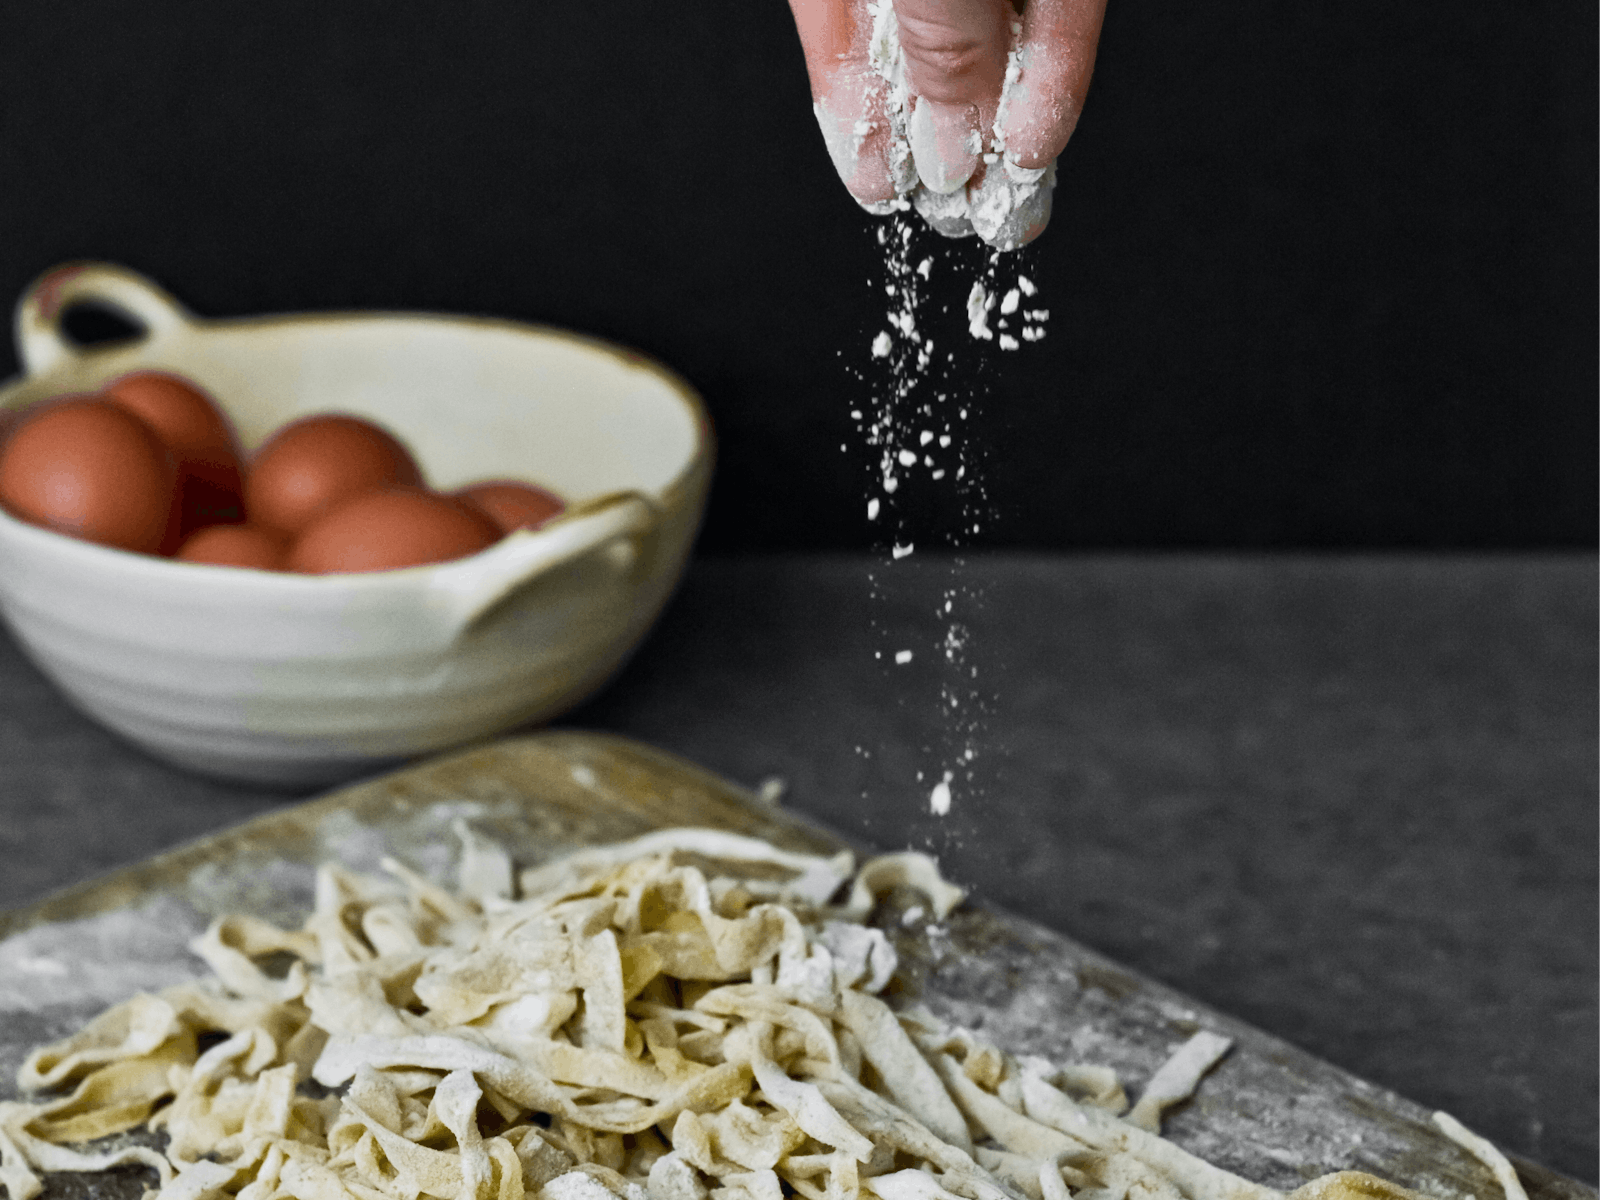 Pasta making course